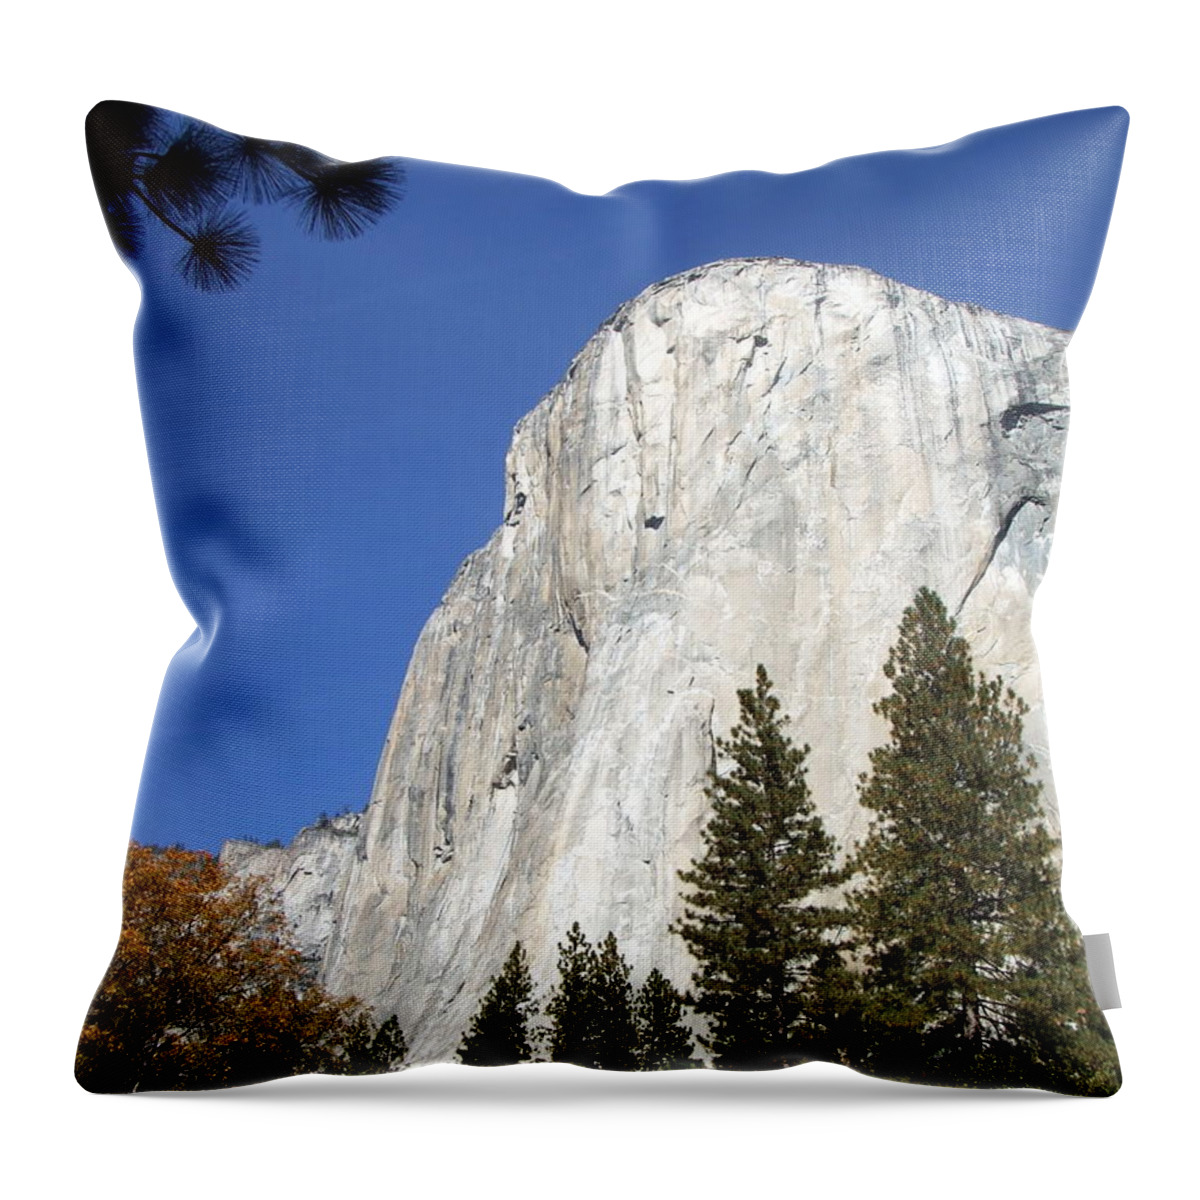 Half Throw Pillow featuring the photograph Half Dome Yosemite by Richard Reeve